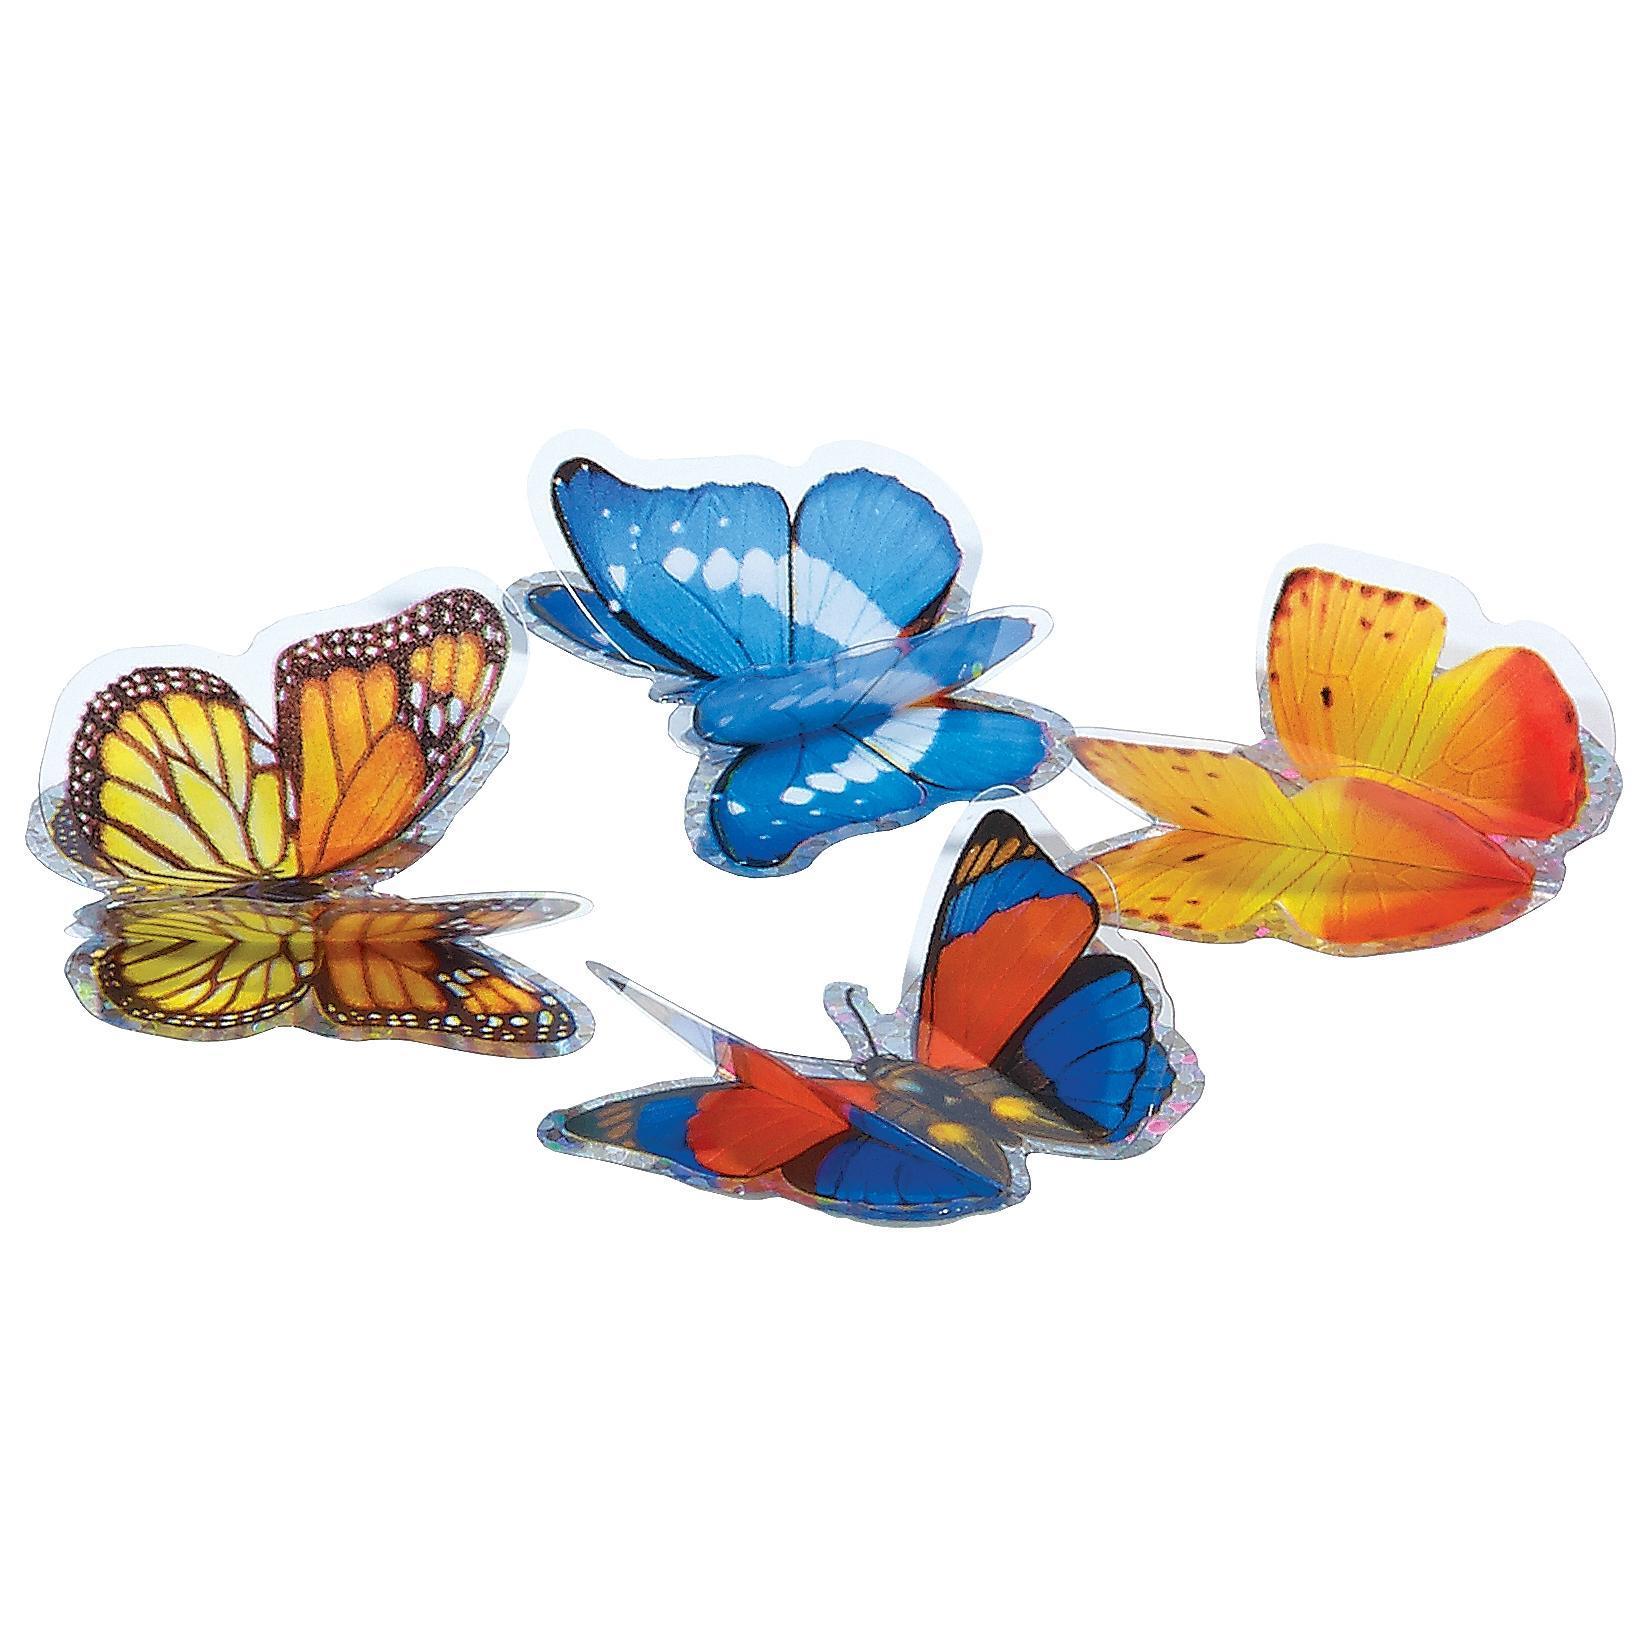 Insect Lore 3D Butterfly Stickers